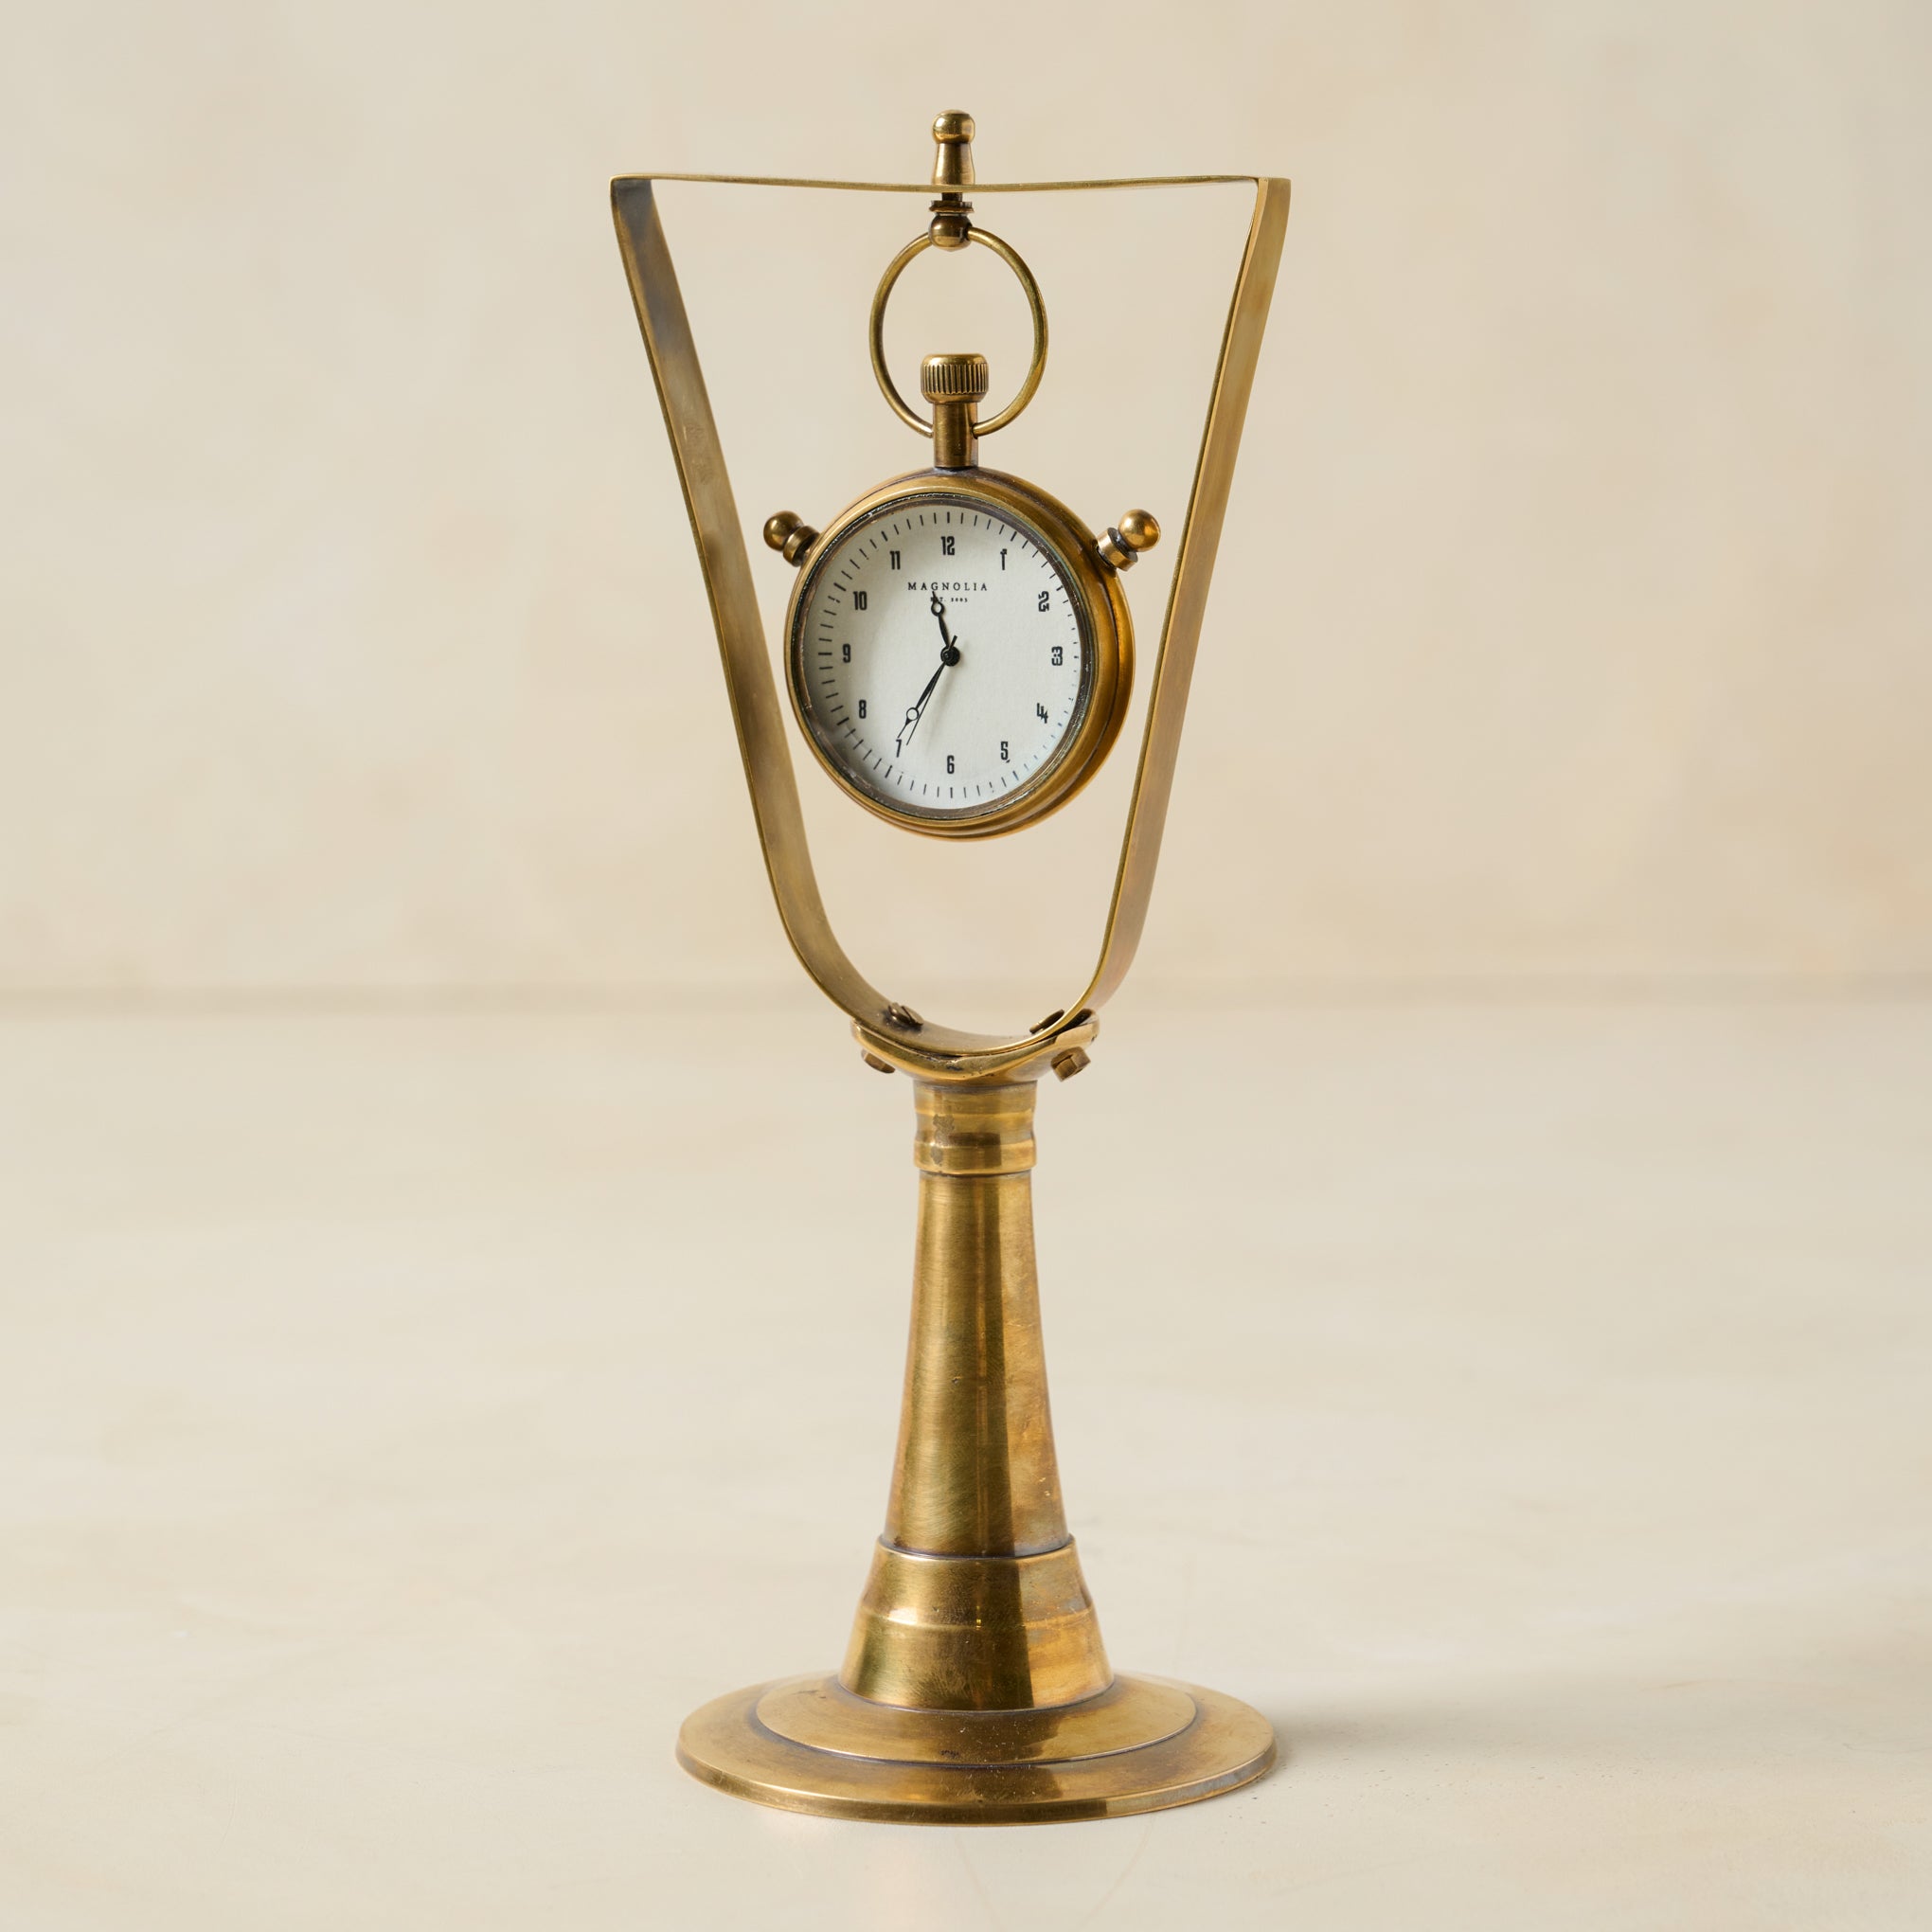 Antique Inspired Hanging Table Clock $46.00